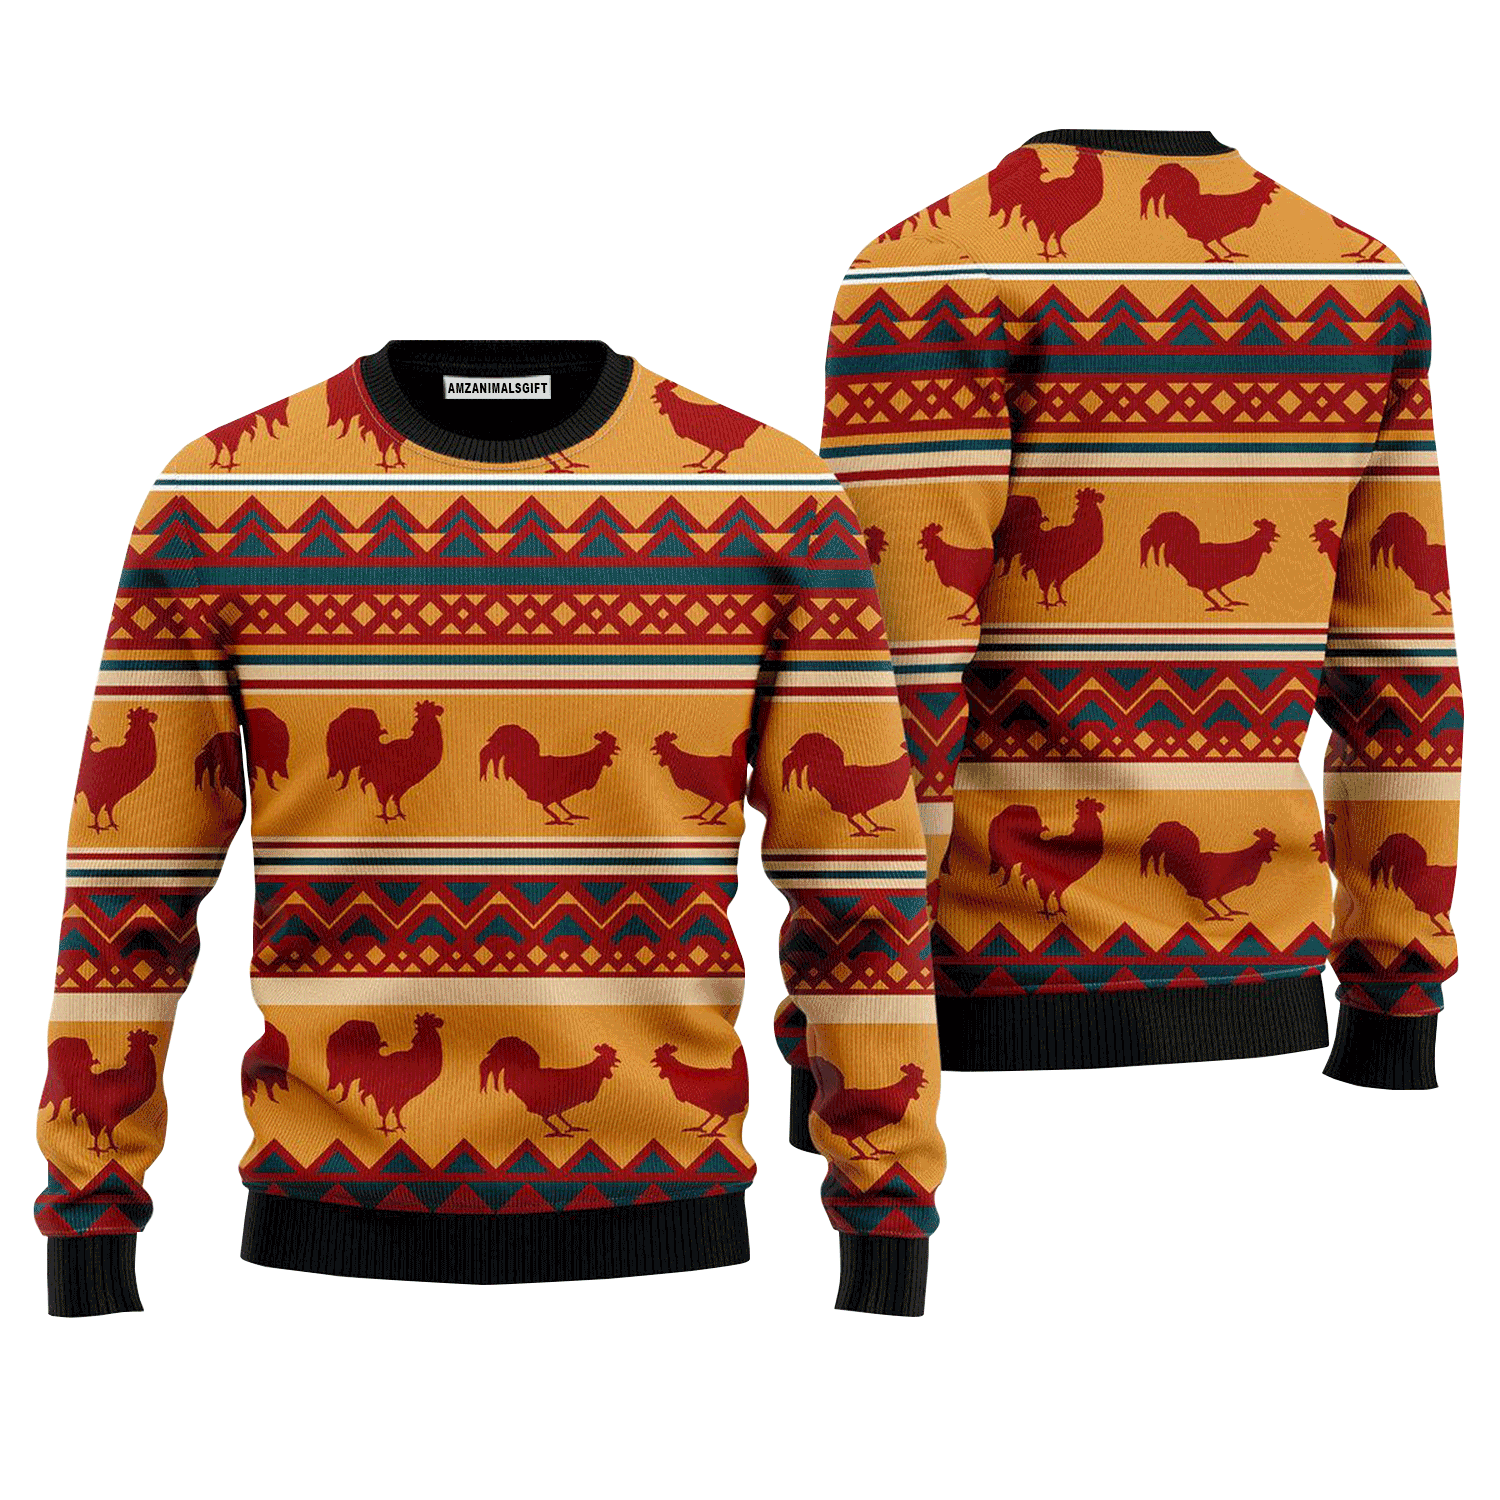 Amazing Chicken Sweater, Ugly Sweater For Men & Women, Perfect Outfit For Christmas New Year Autumn Winter